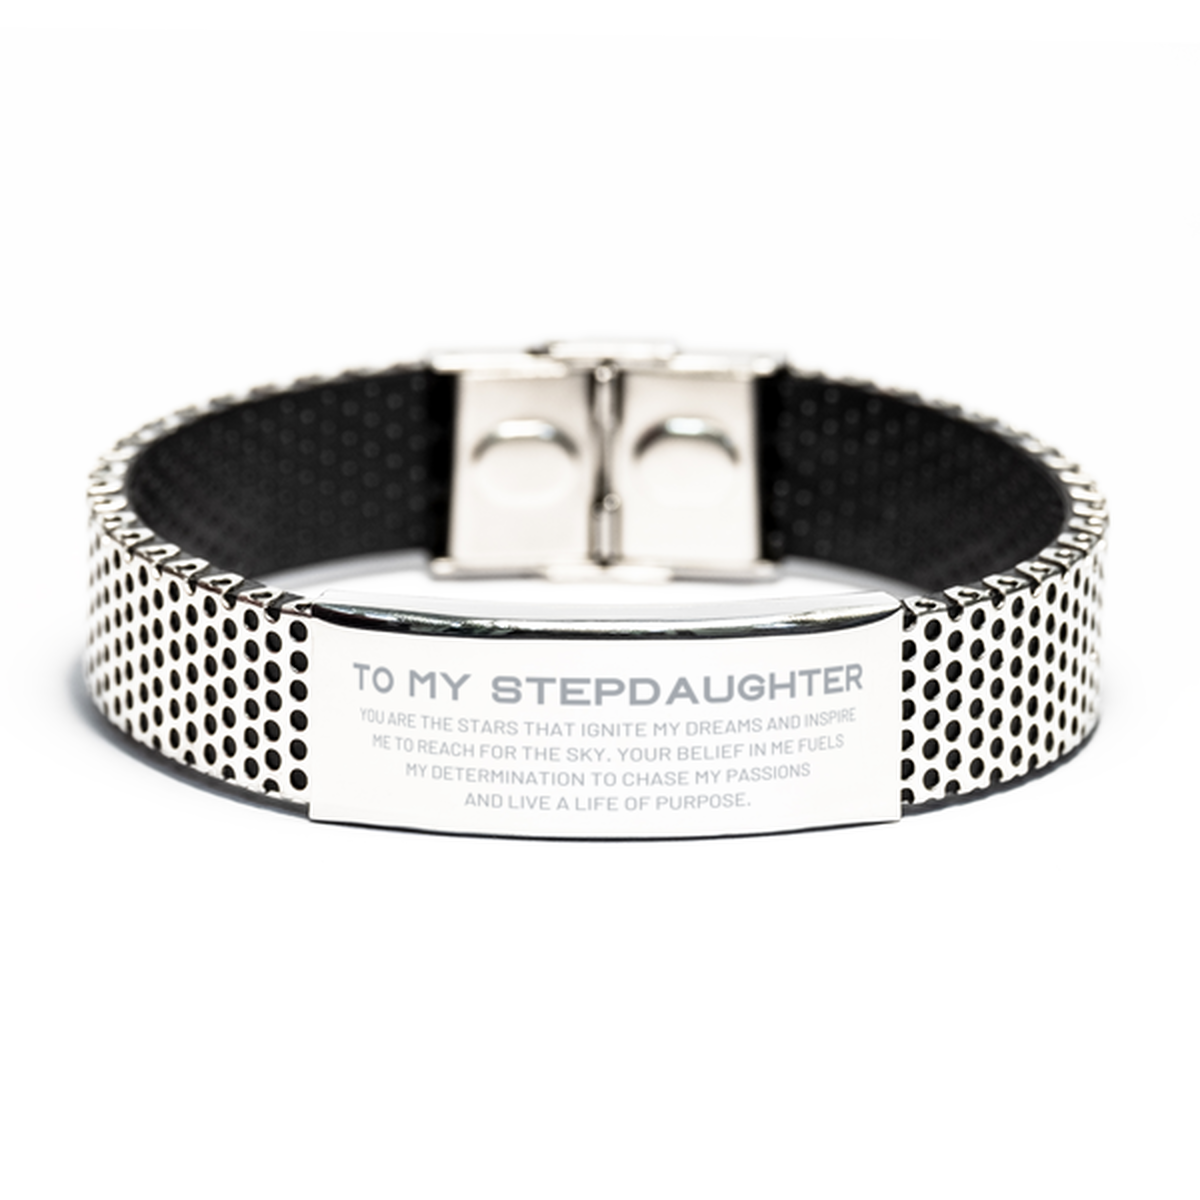 To My Stepdaughter Stainless Steel Bracelet, You are the stars that ignite my dreams and inspire me to reach for the sky, Birthday Unique Gifts For Stepdaughter, Thank You Gifts For Stepdaughter